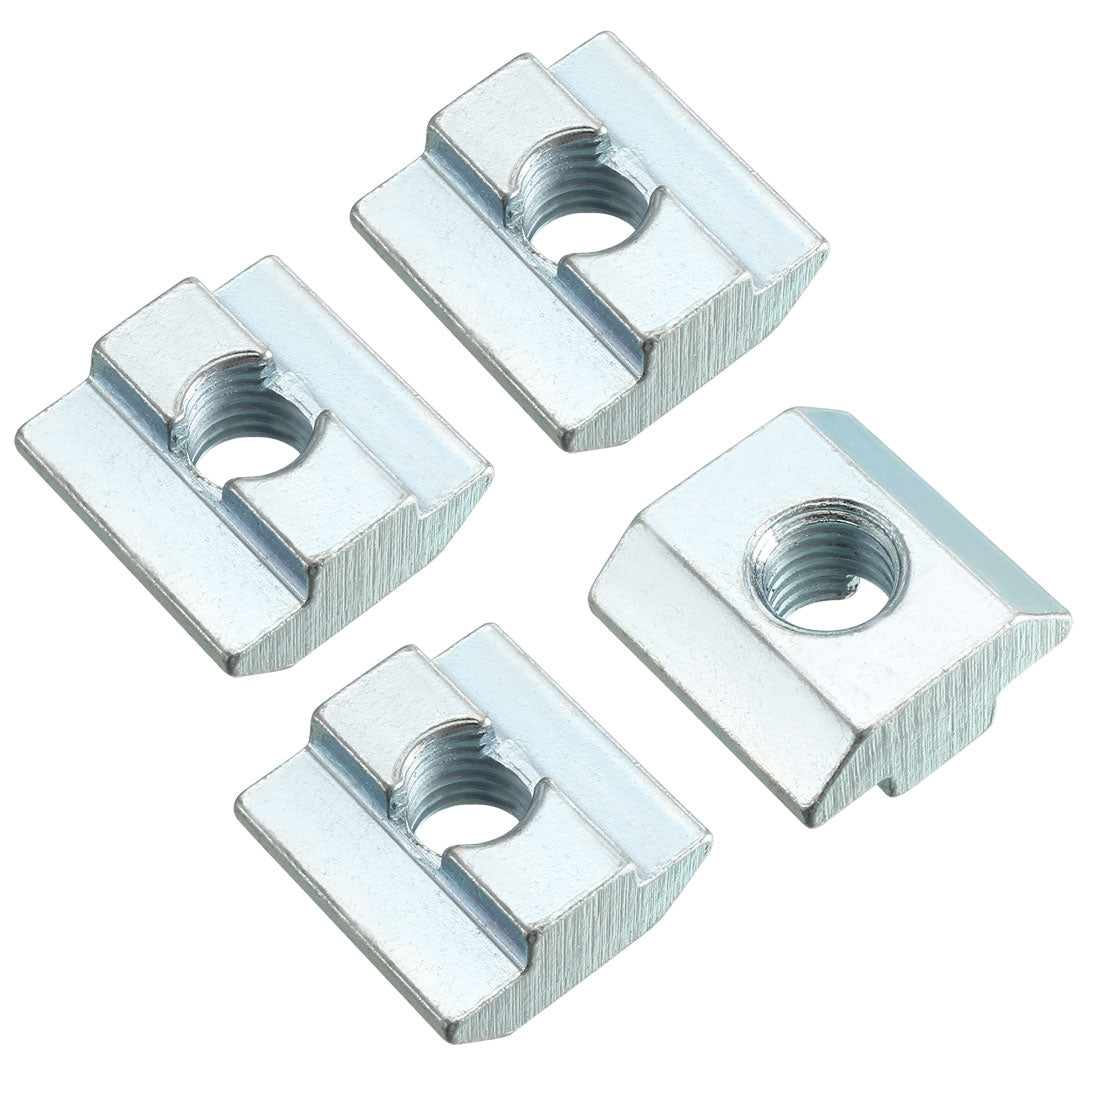 Uxcell Uxcell Slide in T-Nut, M4 Threaded for 4040 Series Aluminum Extrusions Profile 4pcs